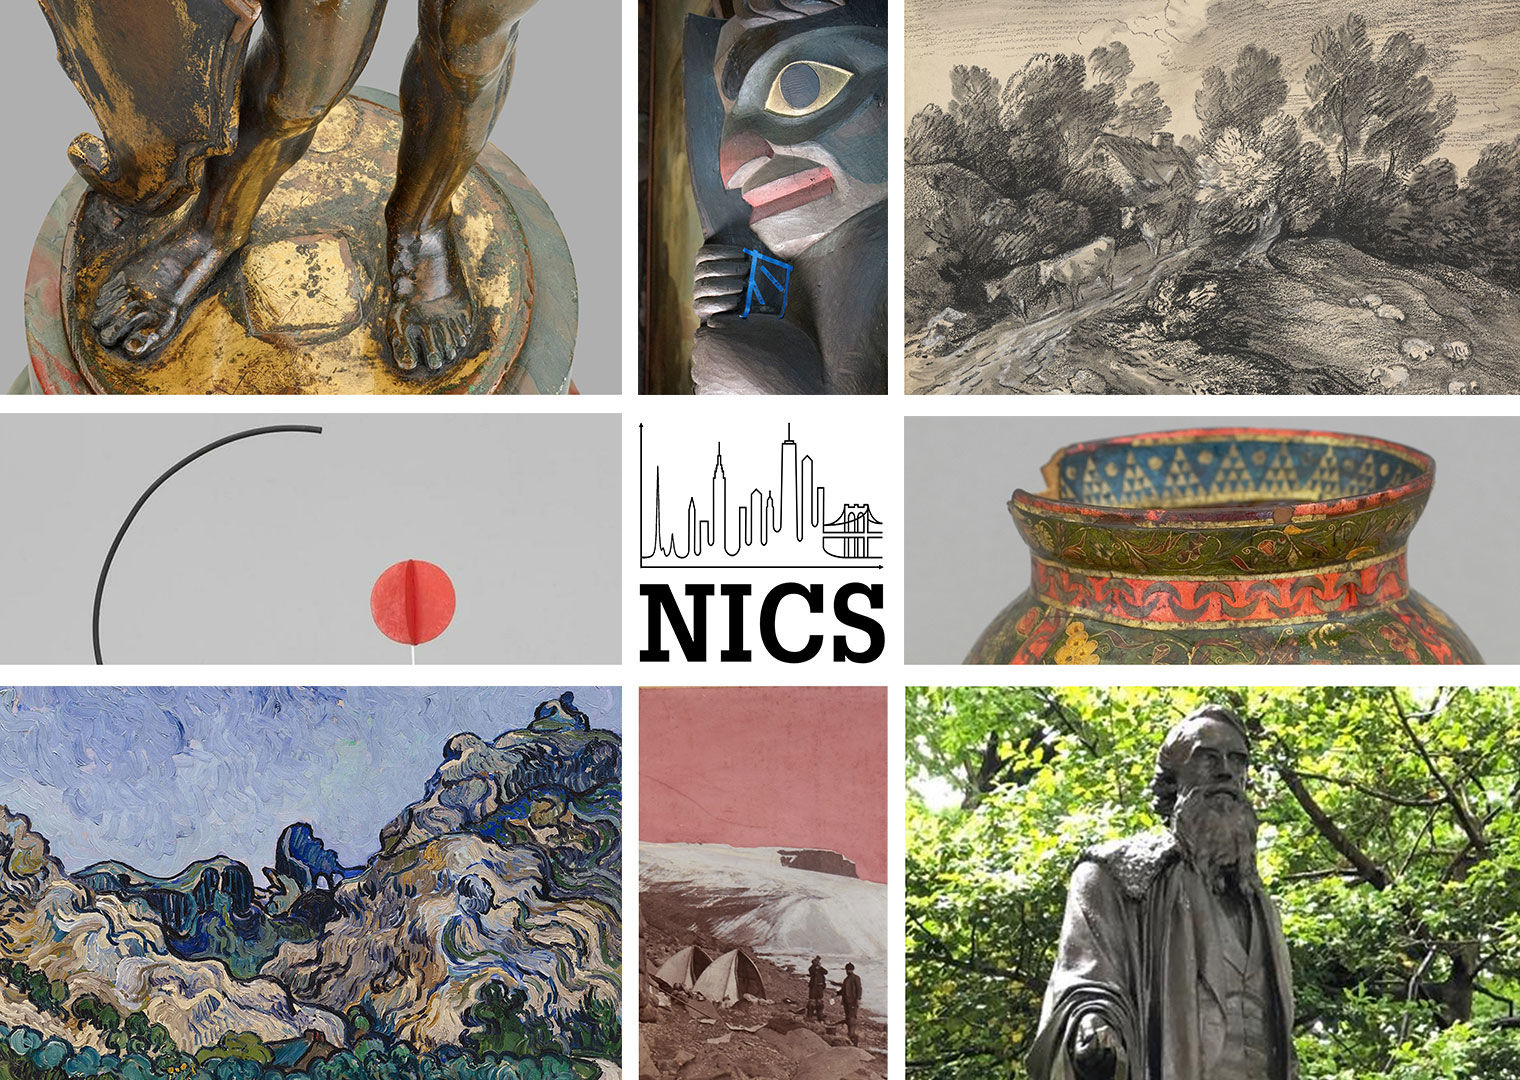 Composite image with the NICS logo in the center surrounded by images of various artworks; starting in the top left corner: a detail of feet of a bronze sculpture, a carved totem face, a pencil drawing of a landscape, a cropped view of the lip of an ornate vase, a sculpture outdoors among trees, a photograph of explorers camped on an icy field, and a painted landscape of rolling mountains and trees against a blue sky.